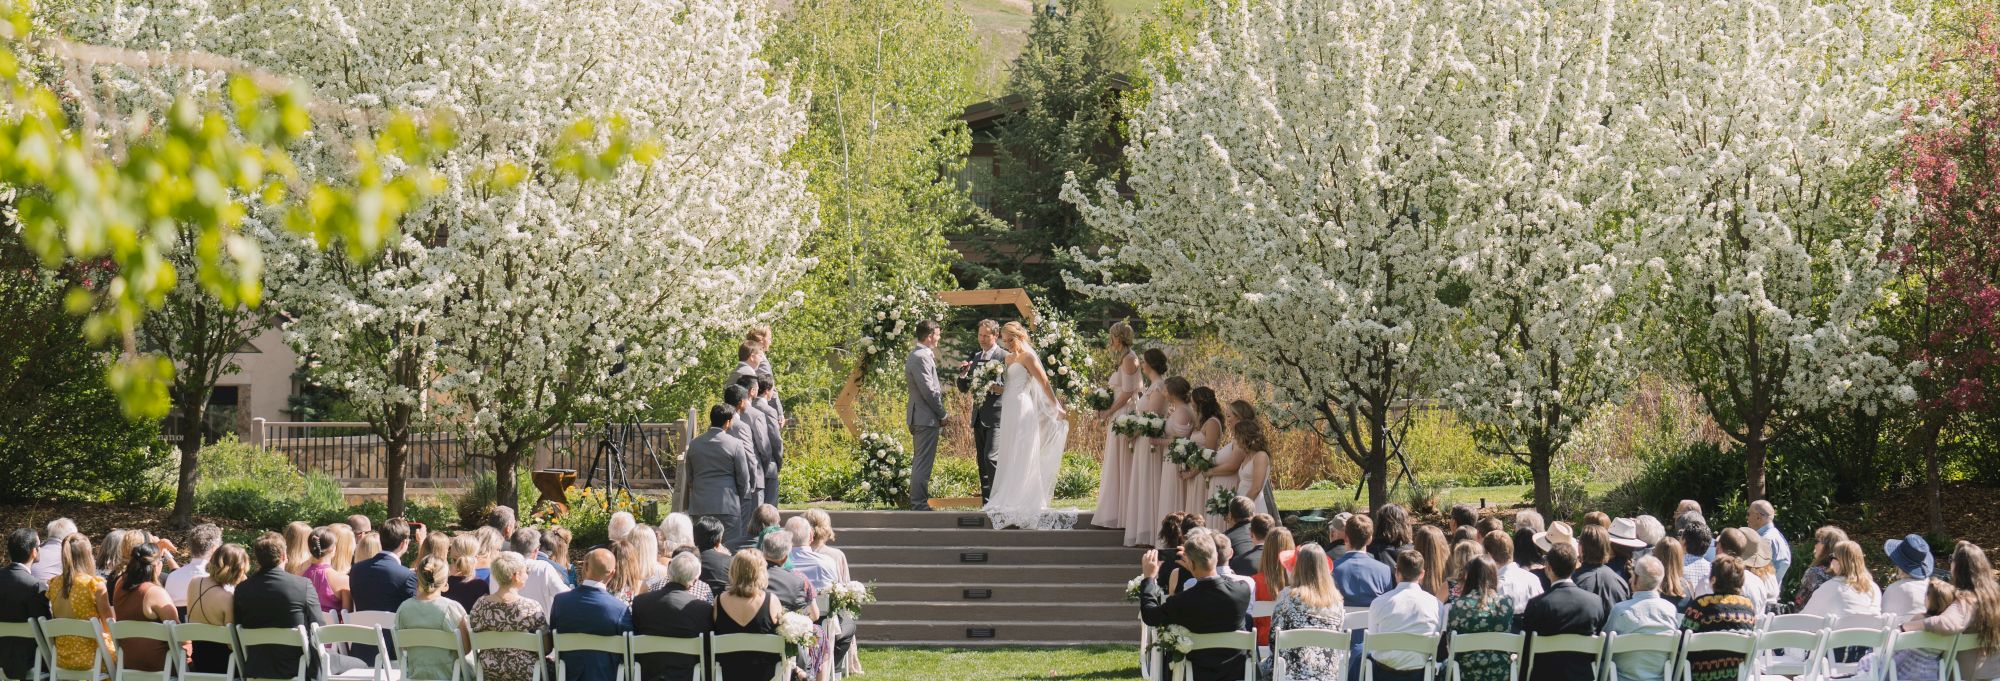 An outdoor wedding ceremony is taking place among blooming trees, with the bride and groom standing on a small stage with guests seated around them.